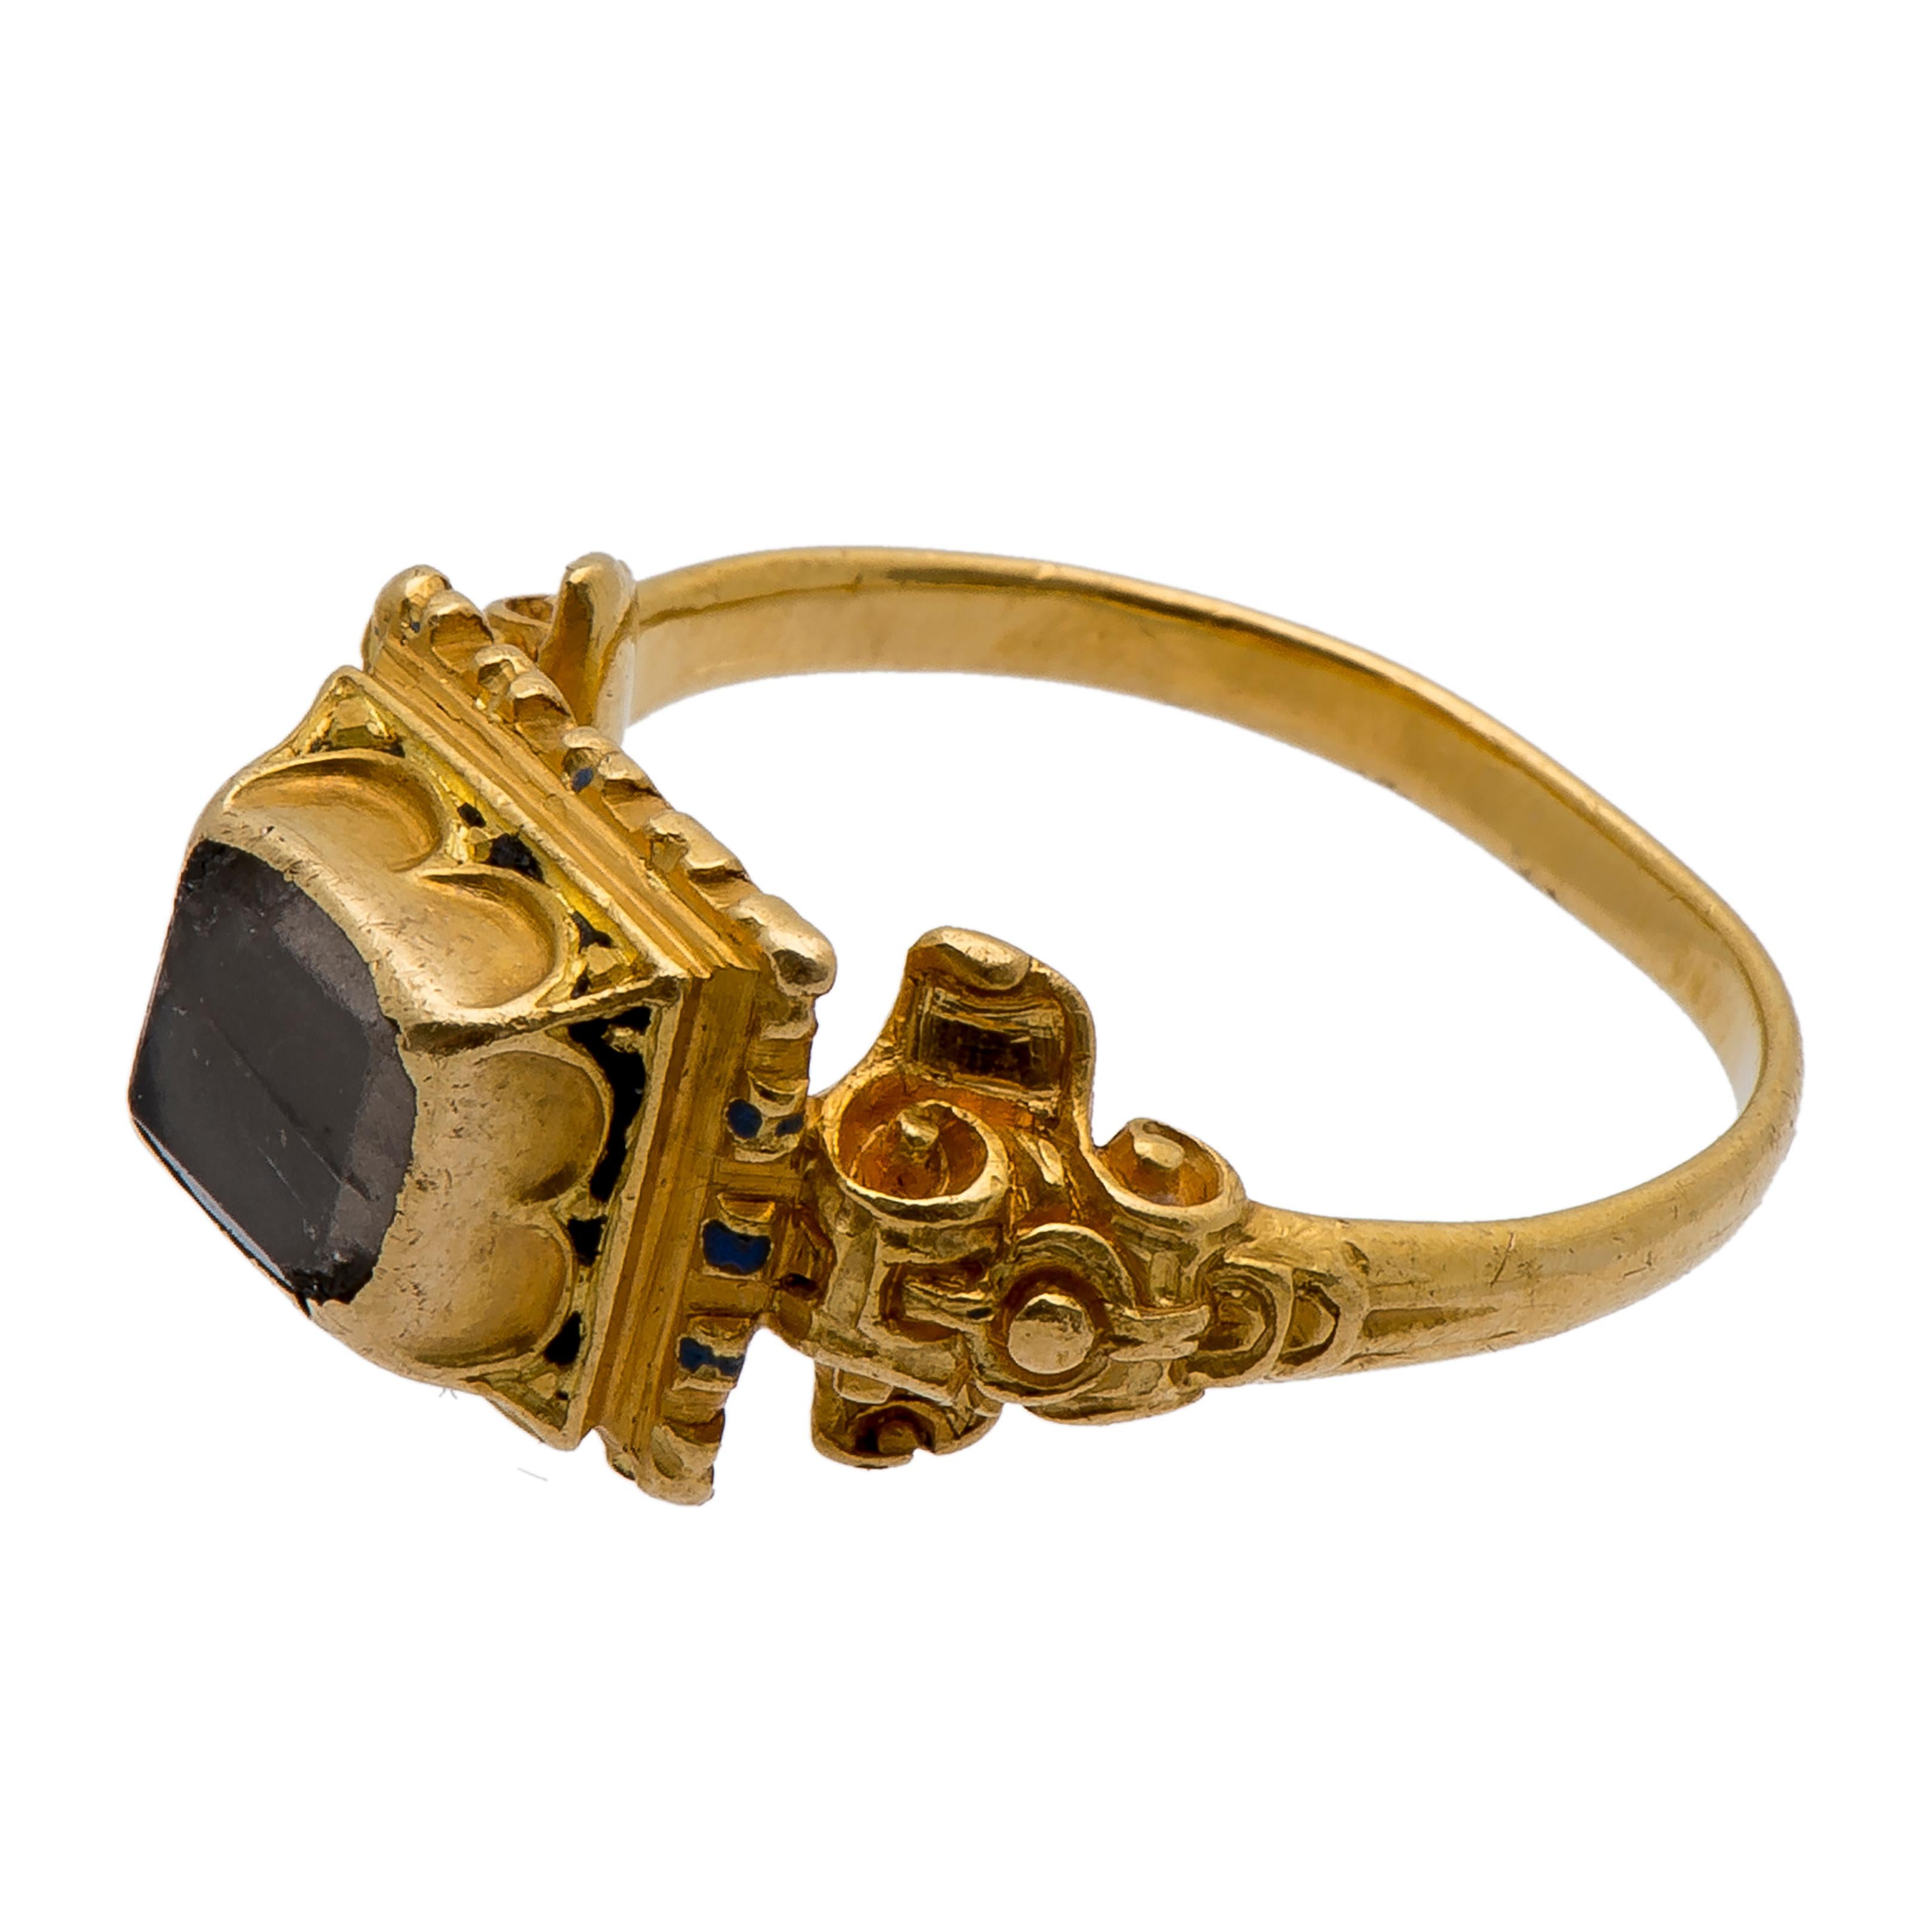 Renaissance Rock Crystal Ring 
Western Europe, about 1580-1600 
Gold, rock crystal, enamel 
Weight 9.0 gr.; circumference 57.65 mm; US size 8 1/2; UK size Q 1/2 

Gold ring with a D-section hoop widening to the capital-shaped shoulders with